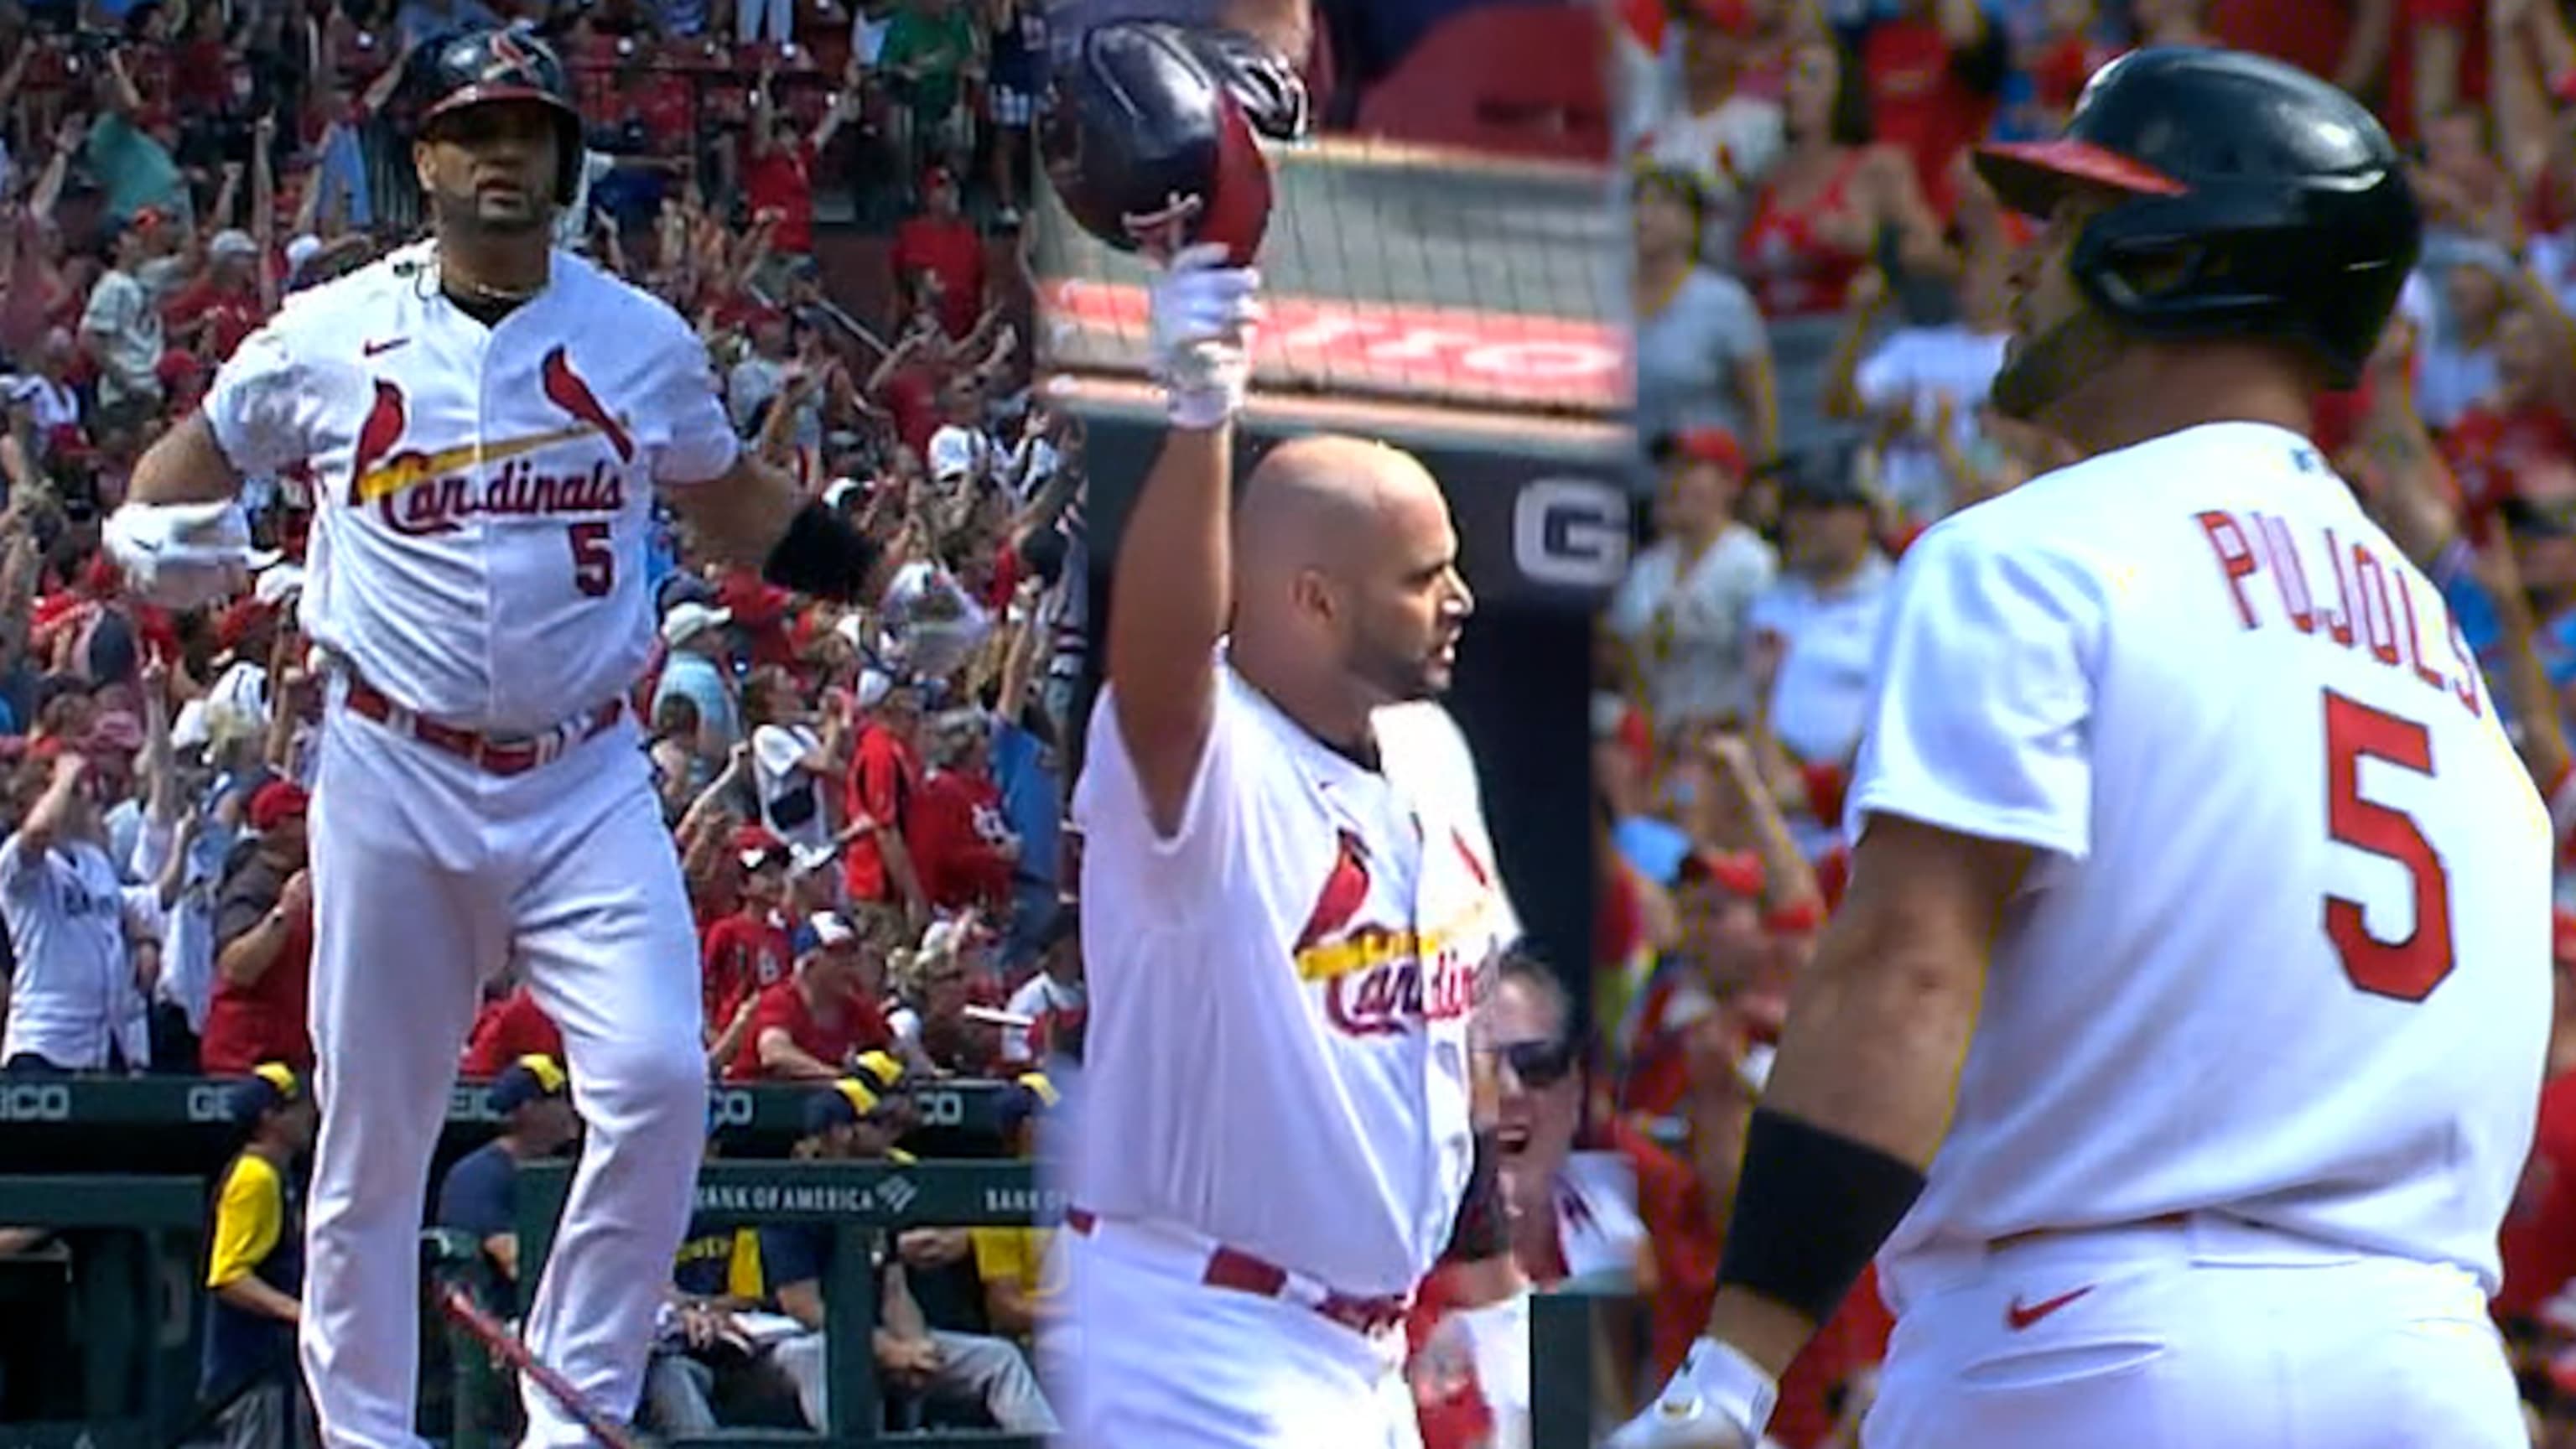 Pujols 2 HRs, up to 692; tops Musial for 2nd in total bases